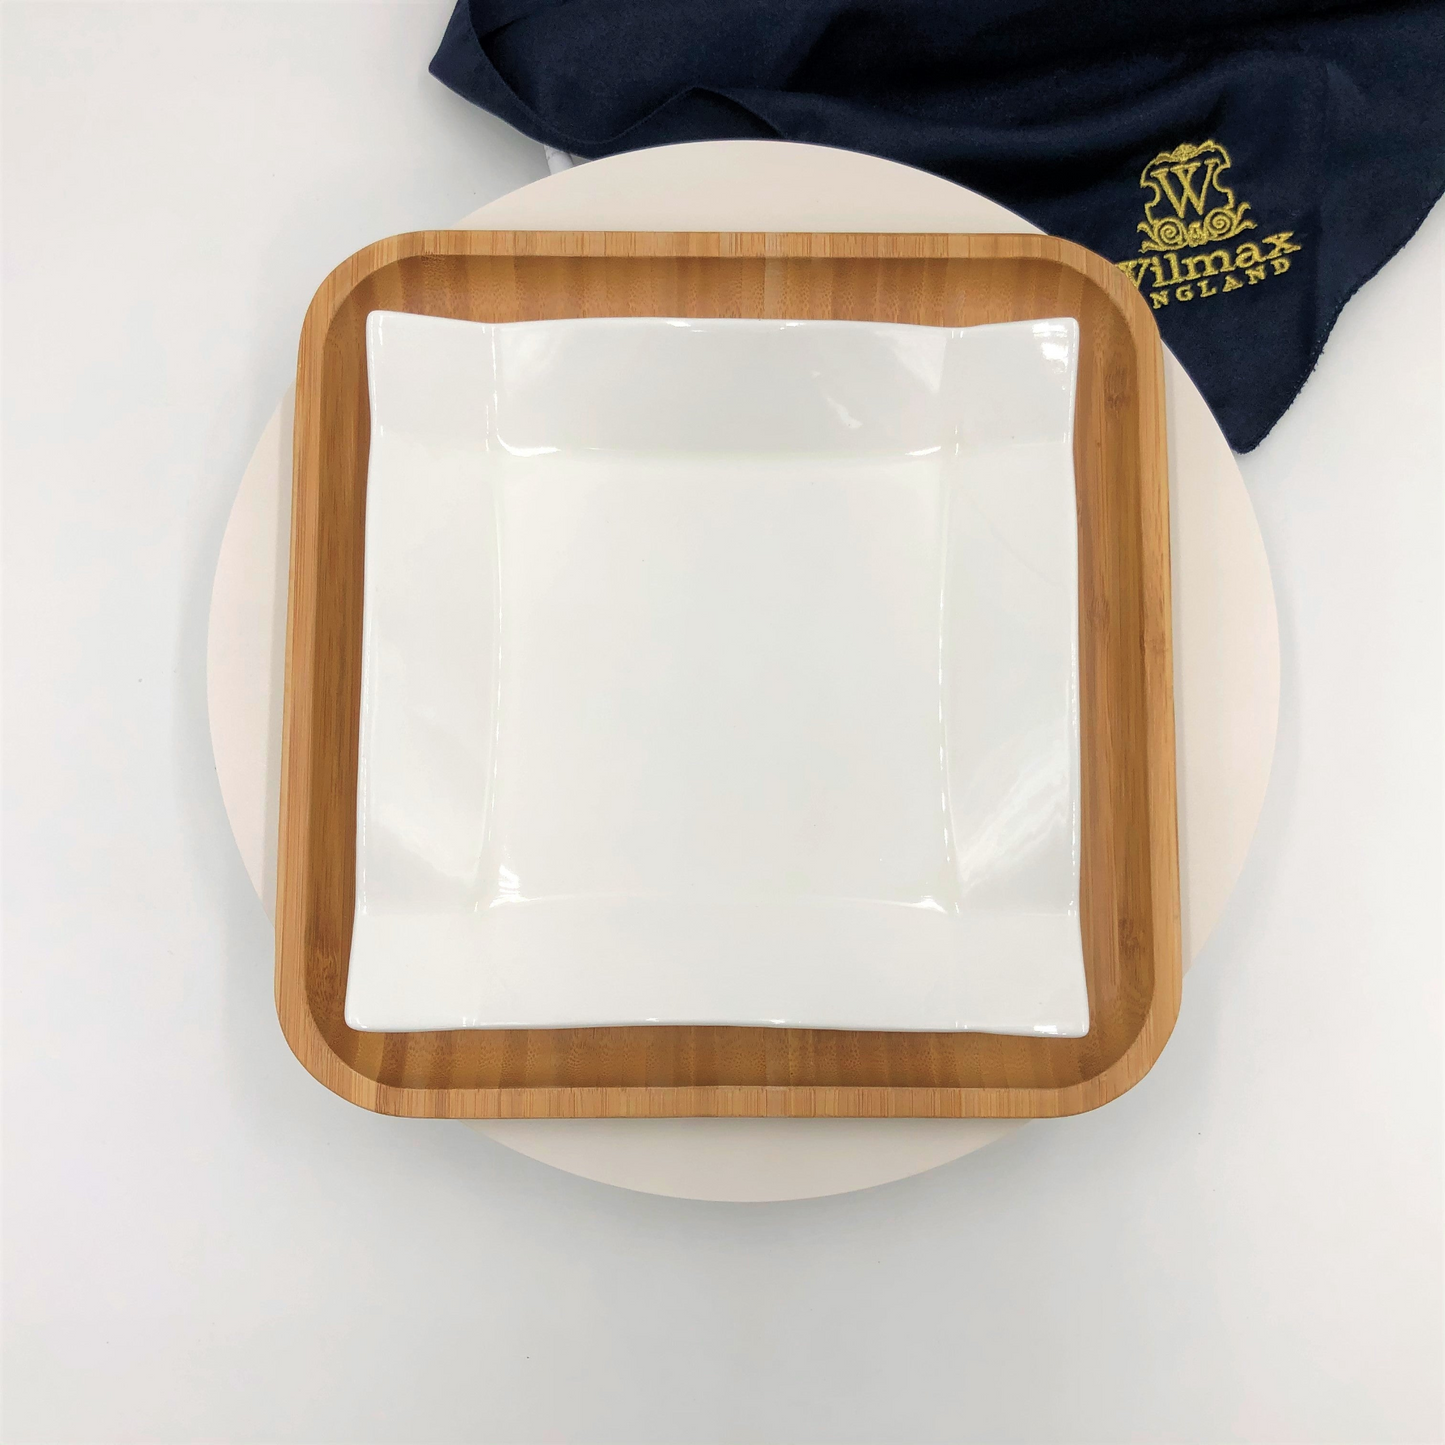 Wilmax Square Bamboo And Fine Porcelain Contemporary Dinnerware Set Of 3 Sizes (6 Piece Set)  WL-555078